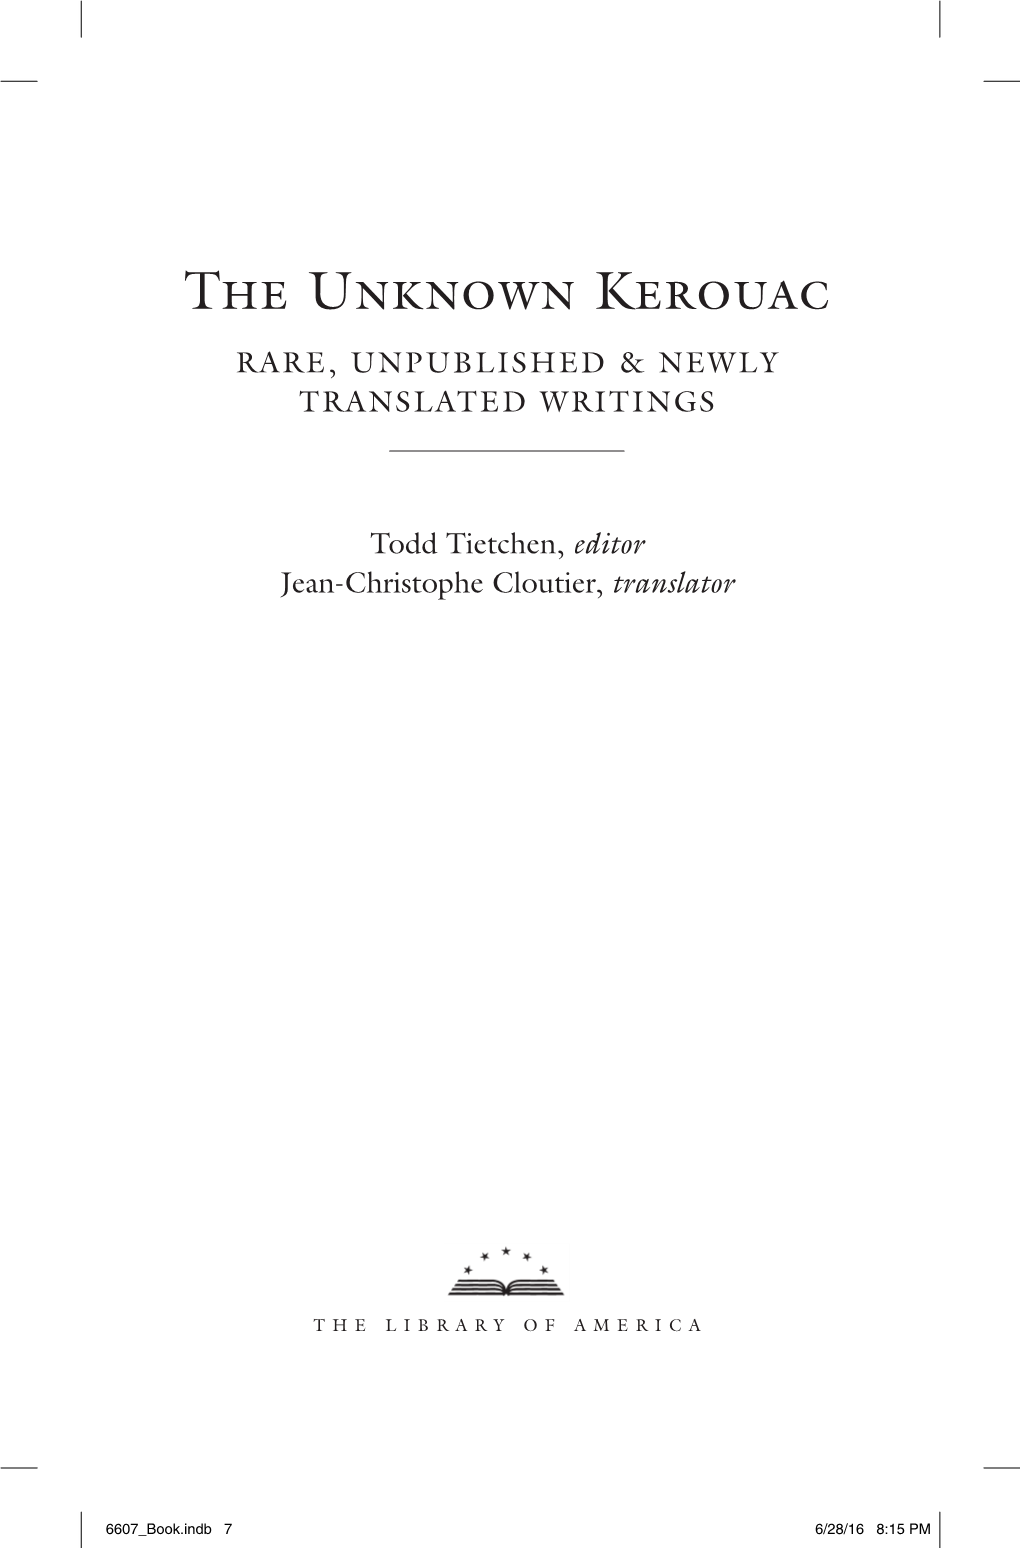 The Unknown Kerouac Rare, Unpublished & Newly Translated Writings